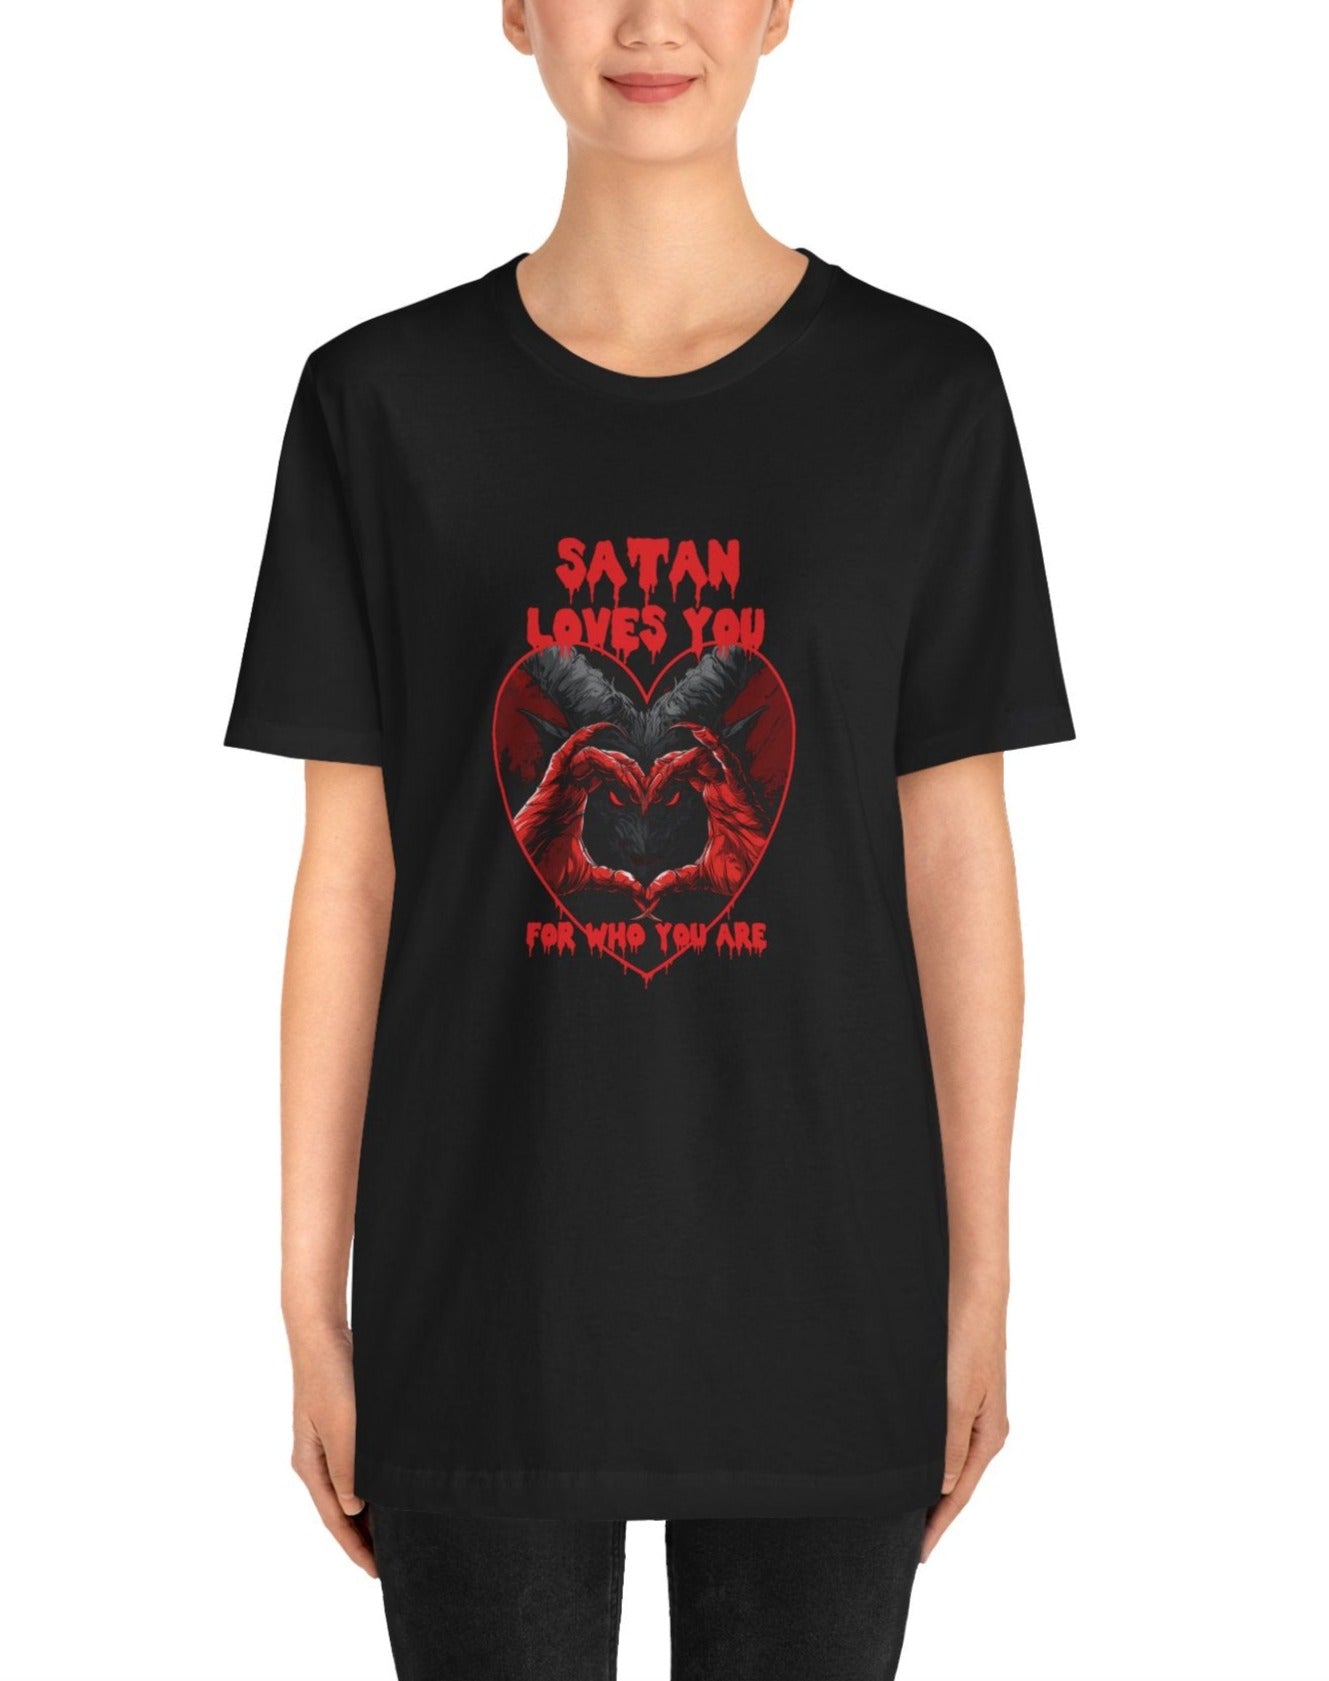 Satan Loves For Who You Are You T-Shirt